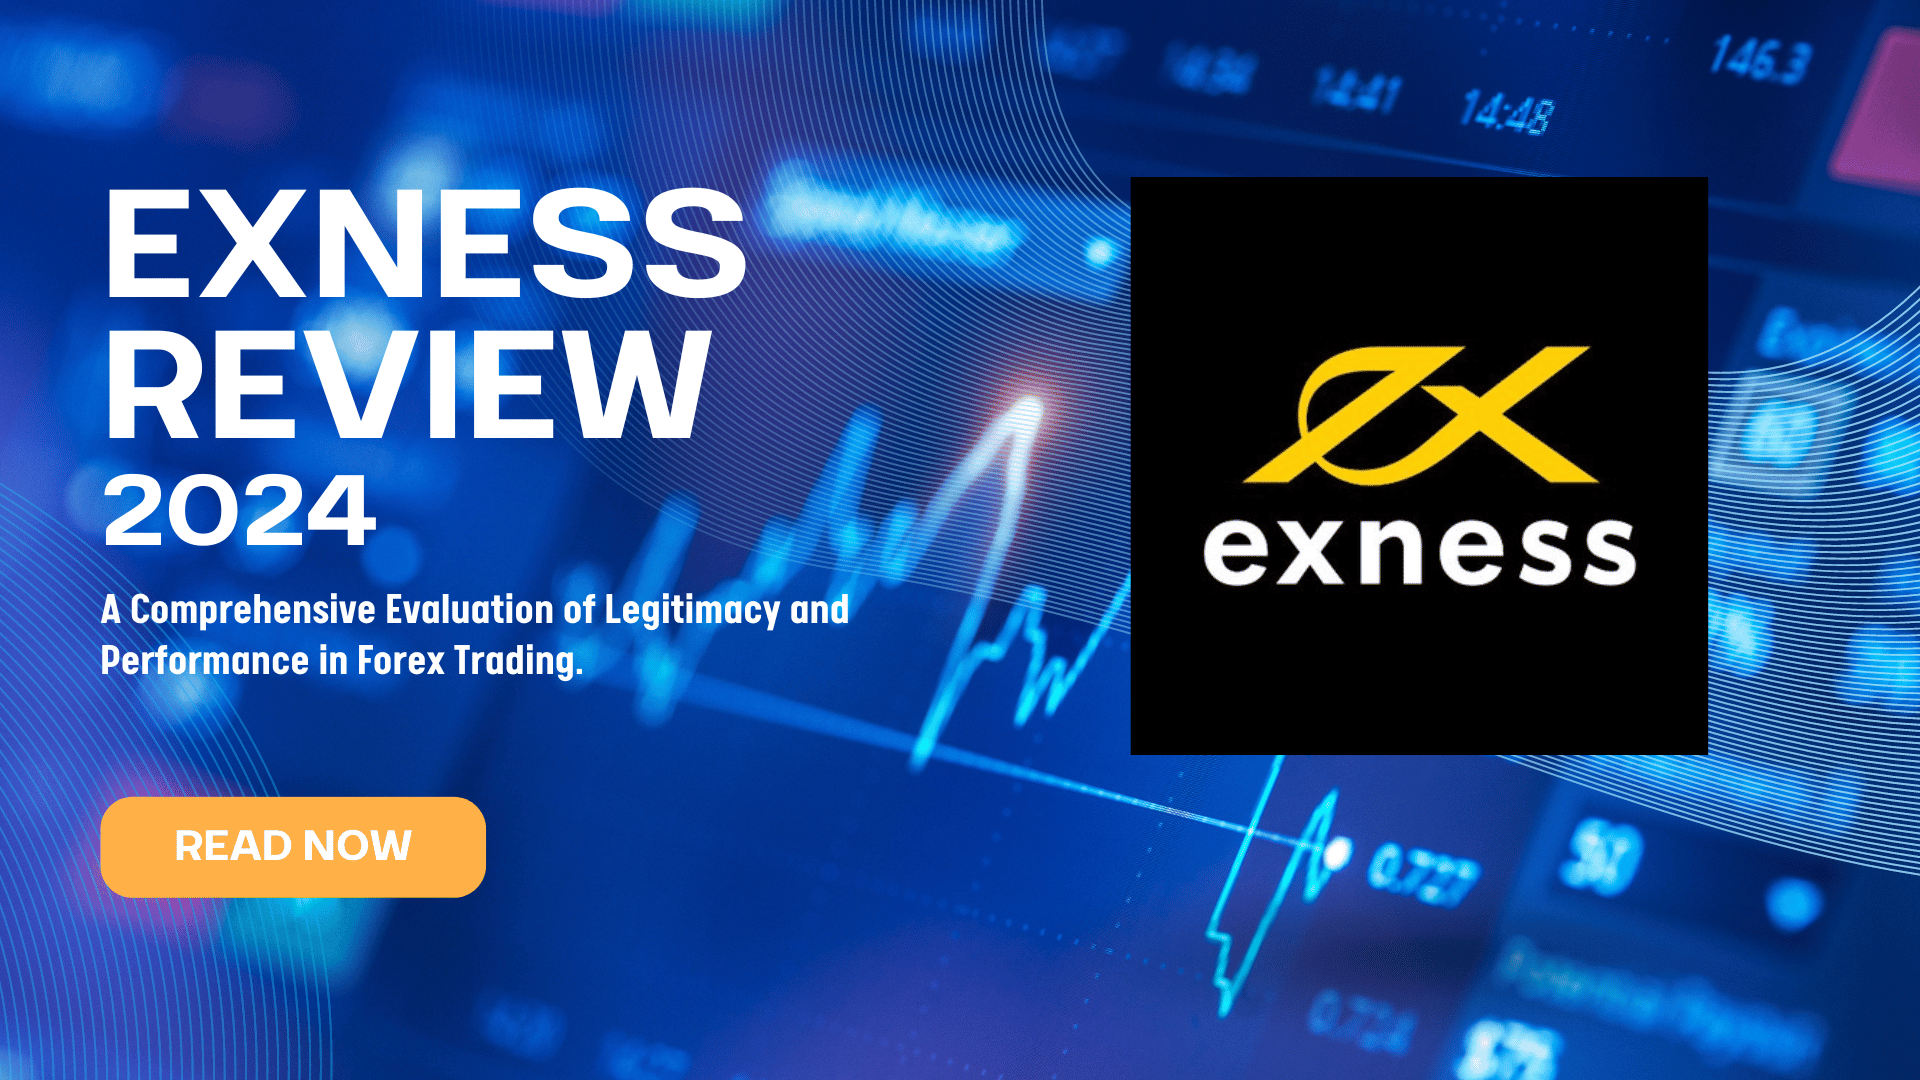 Exness Review 2024: A Comprehensive Evaluation of Legitimacy and Performance in Forex Trading